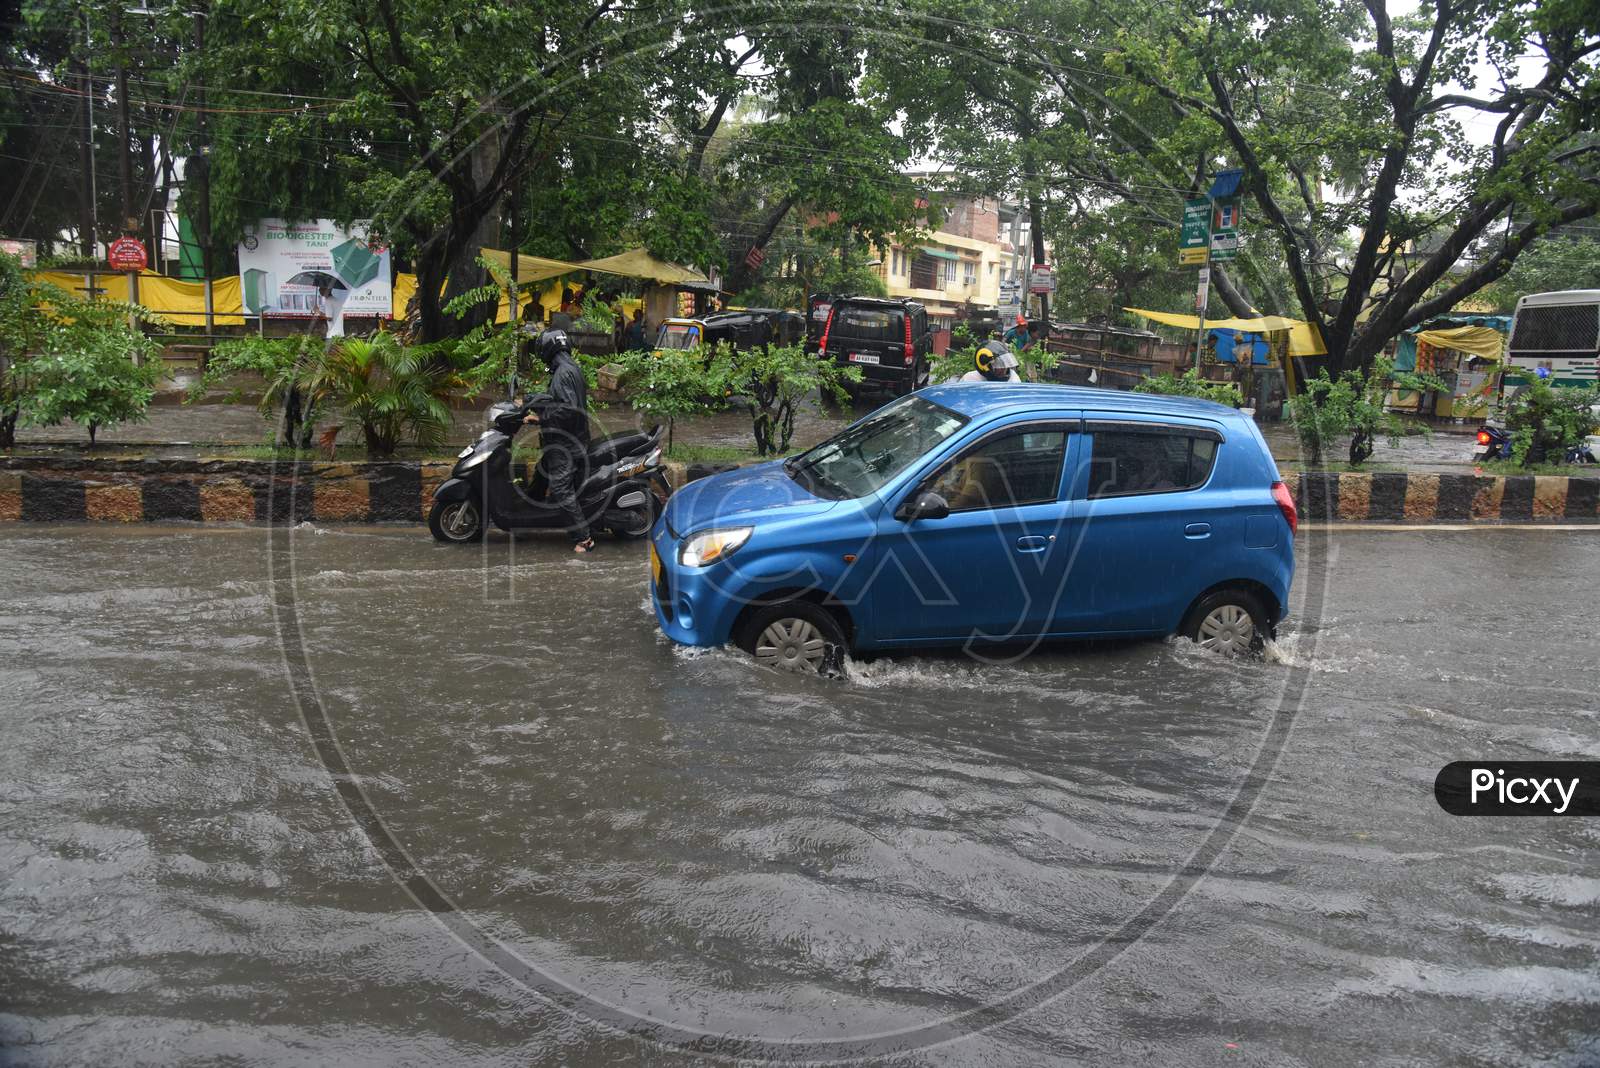 Commuting Vehicles Taking Risky  Rides On  Flooded Roads in Assam Due To Seasonal Floods in Guwahati City , Assam On June 13  2017